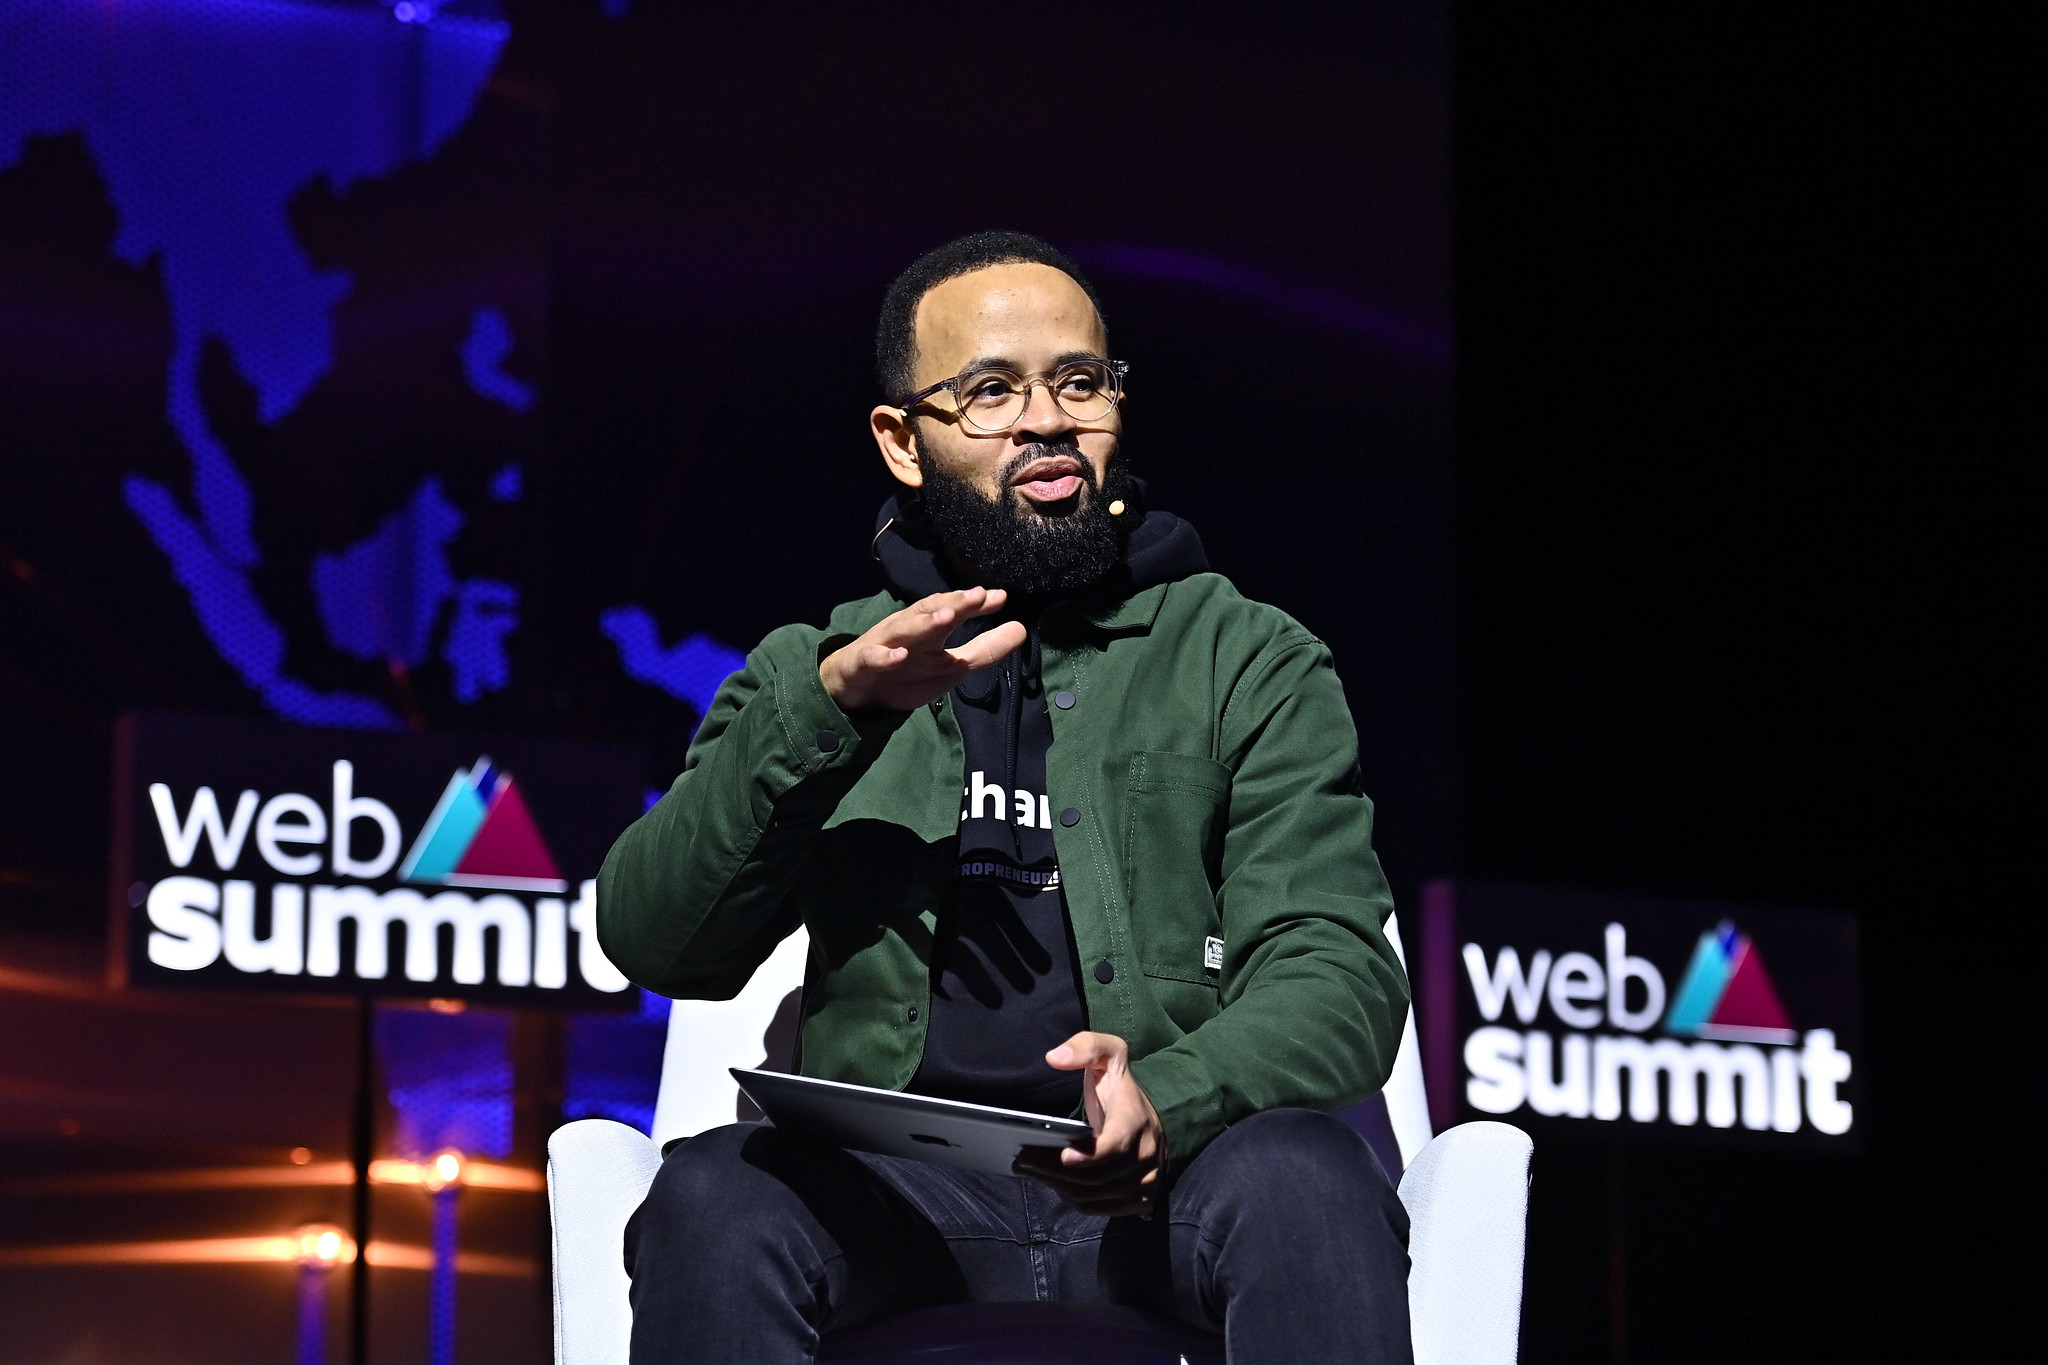 Photograph of a person (Fernando Cabral, managing director/managing partner of FS-360/Djassi Africa) speaking on stage at Web Summit. They are sitting on a chair and holding what appears to be notes in their hand.